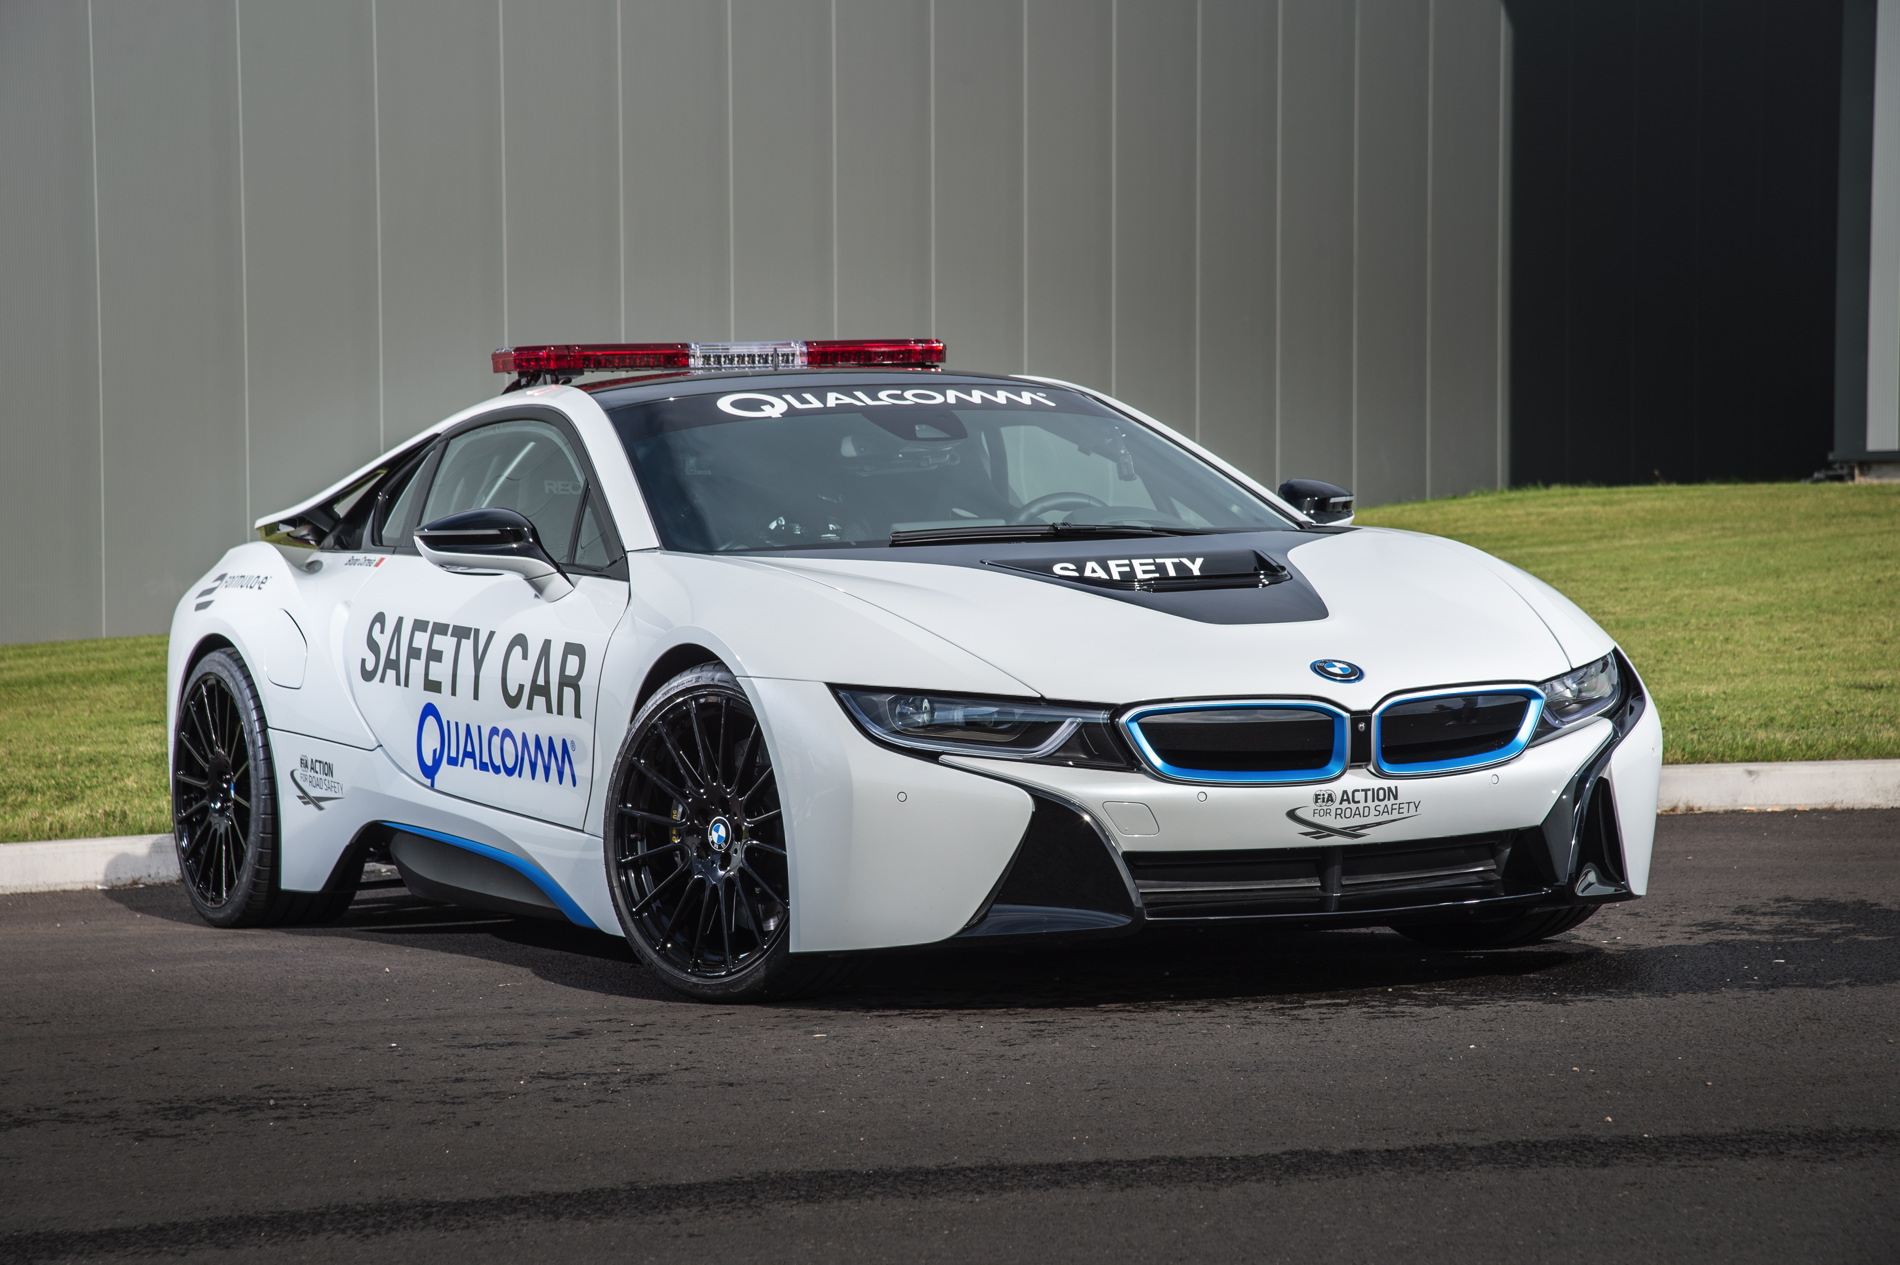 BMW i8 Safety Car could lead to BMW i8 S